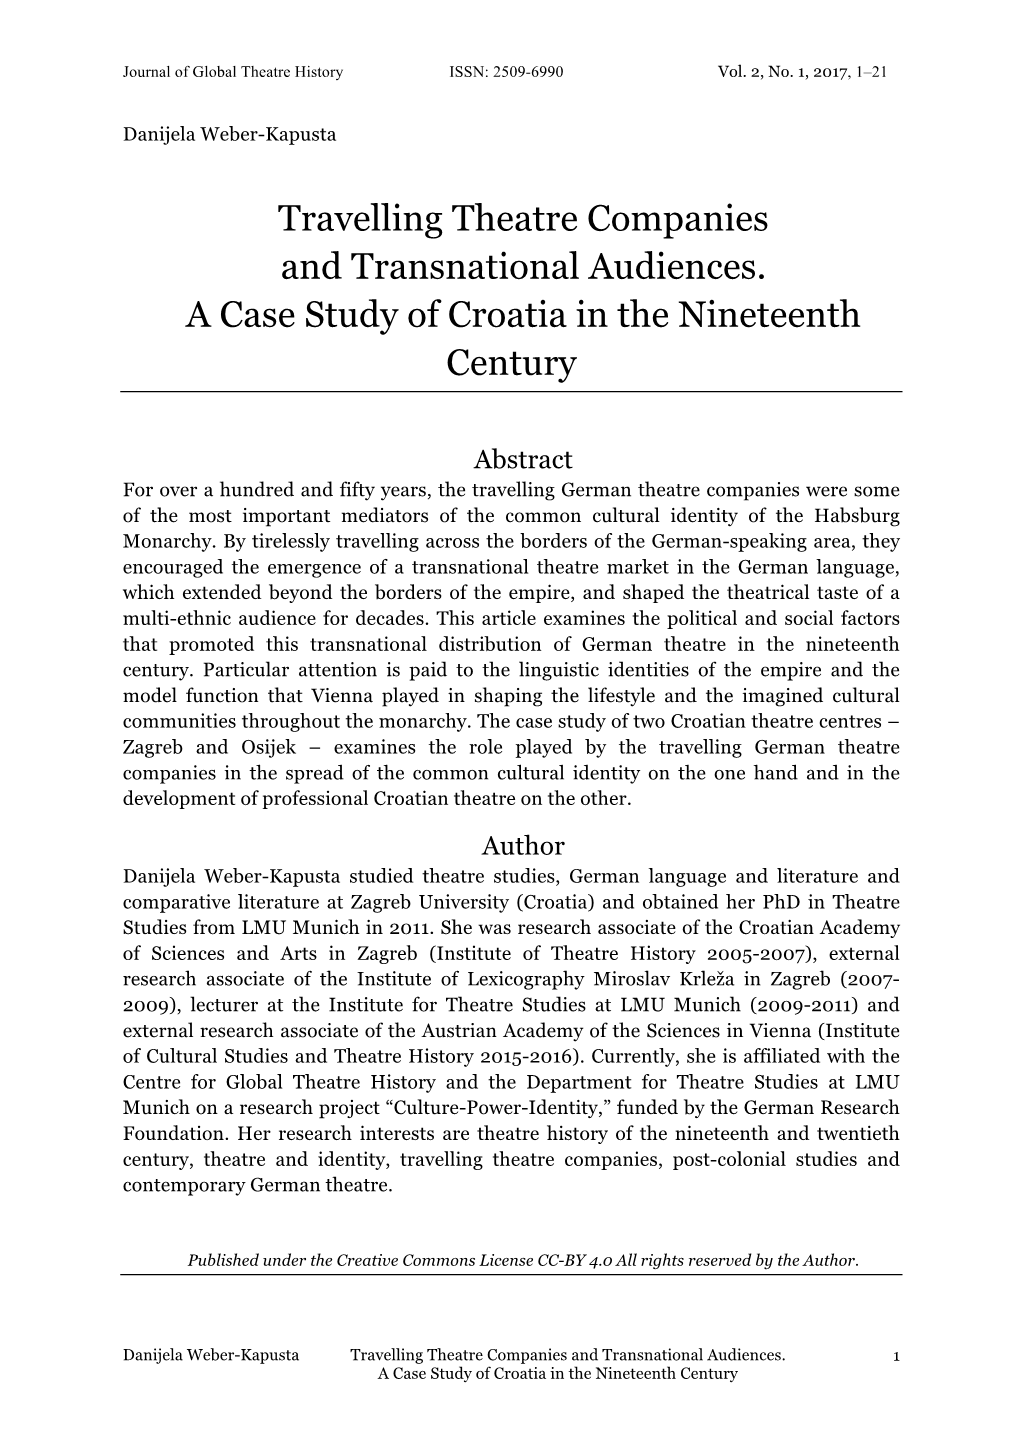 Travelling Theatre Companies and Transnational Audiences. a Case Study of Croatia in the Nineteenth Century